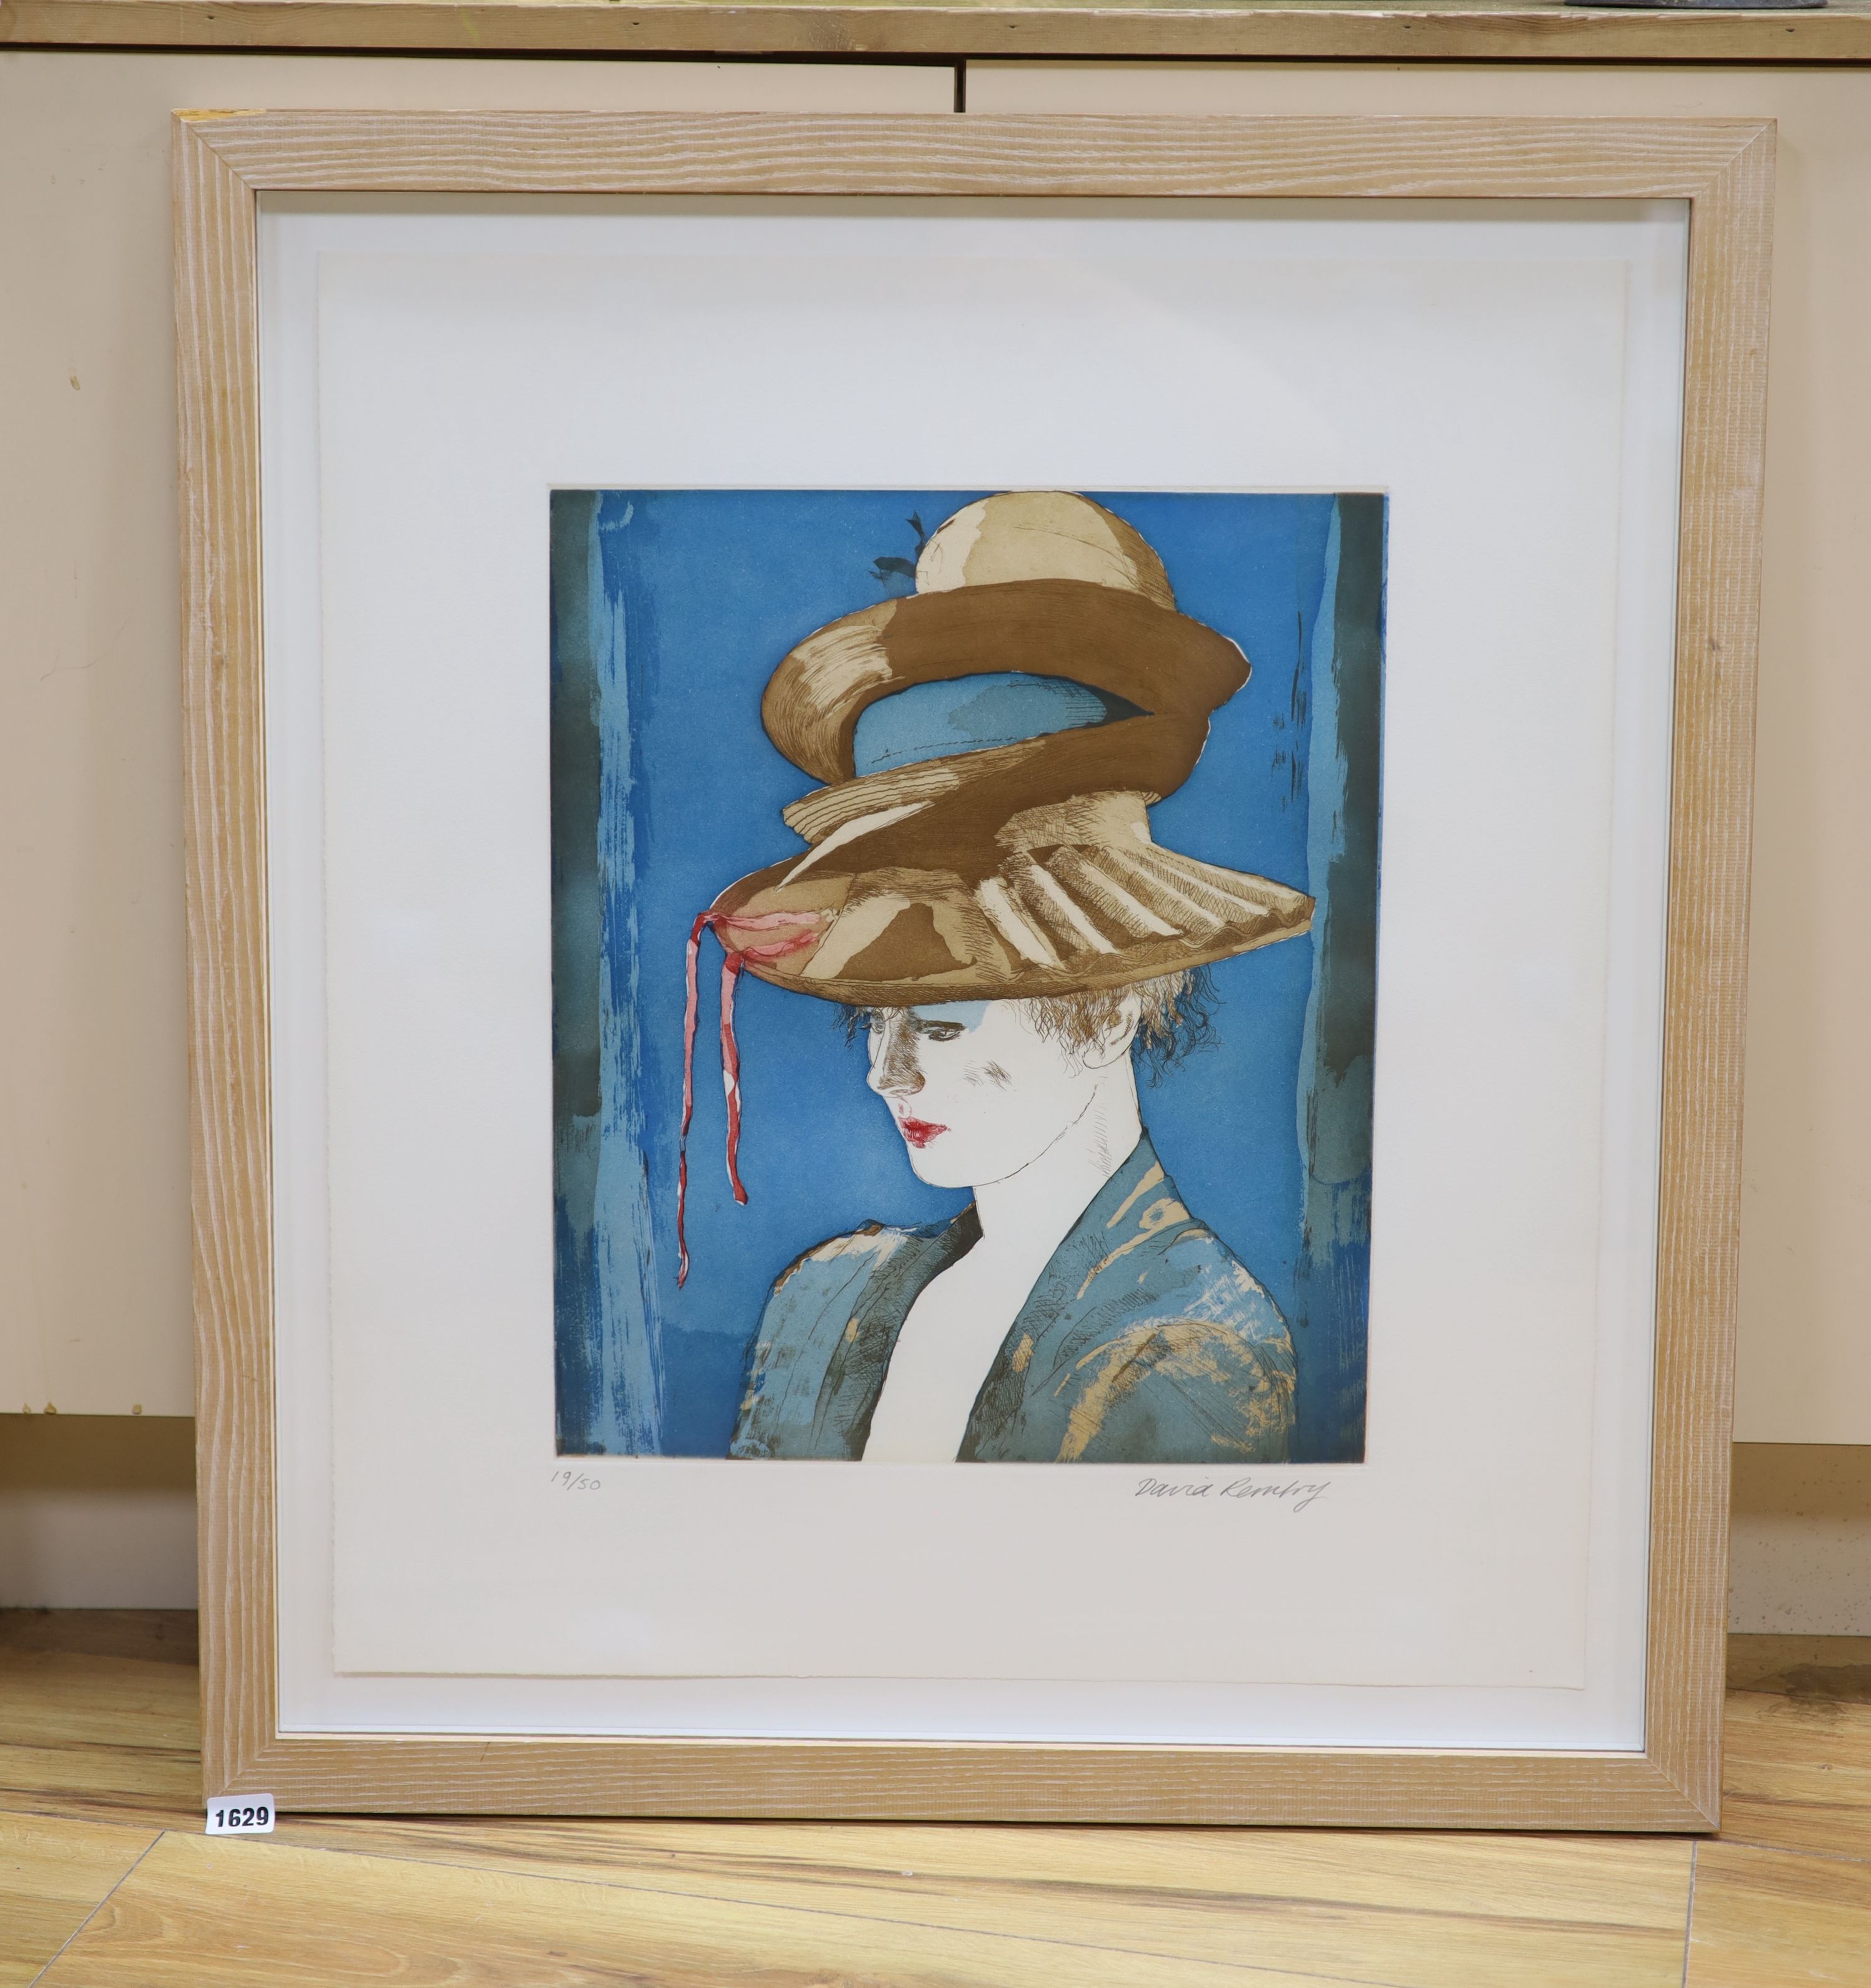 David Remfry (1942-), etching, 'Red Ribbons from the Hat Box Suite 1993', signed, 19/50